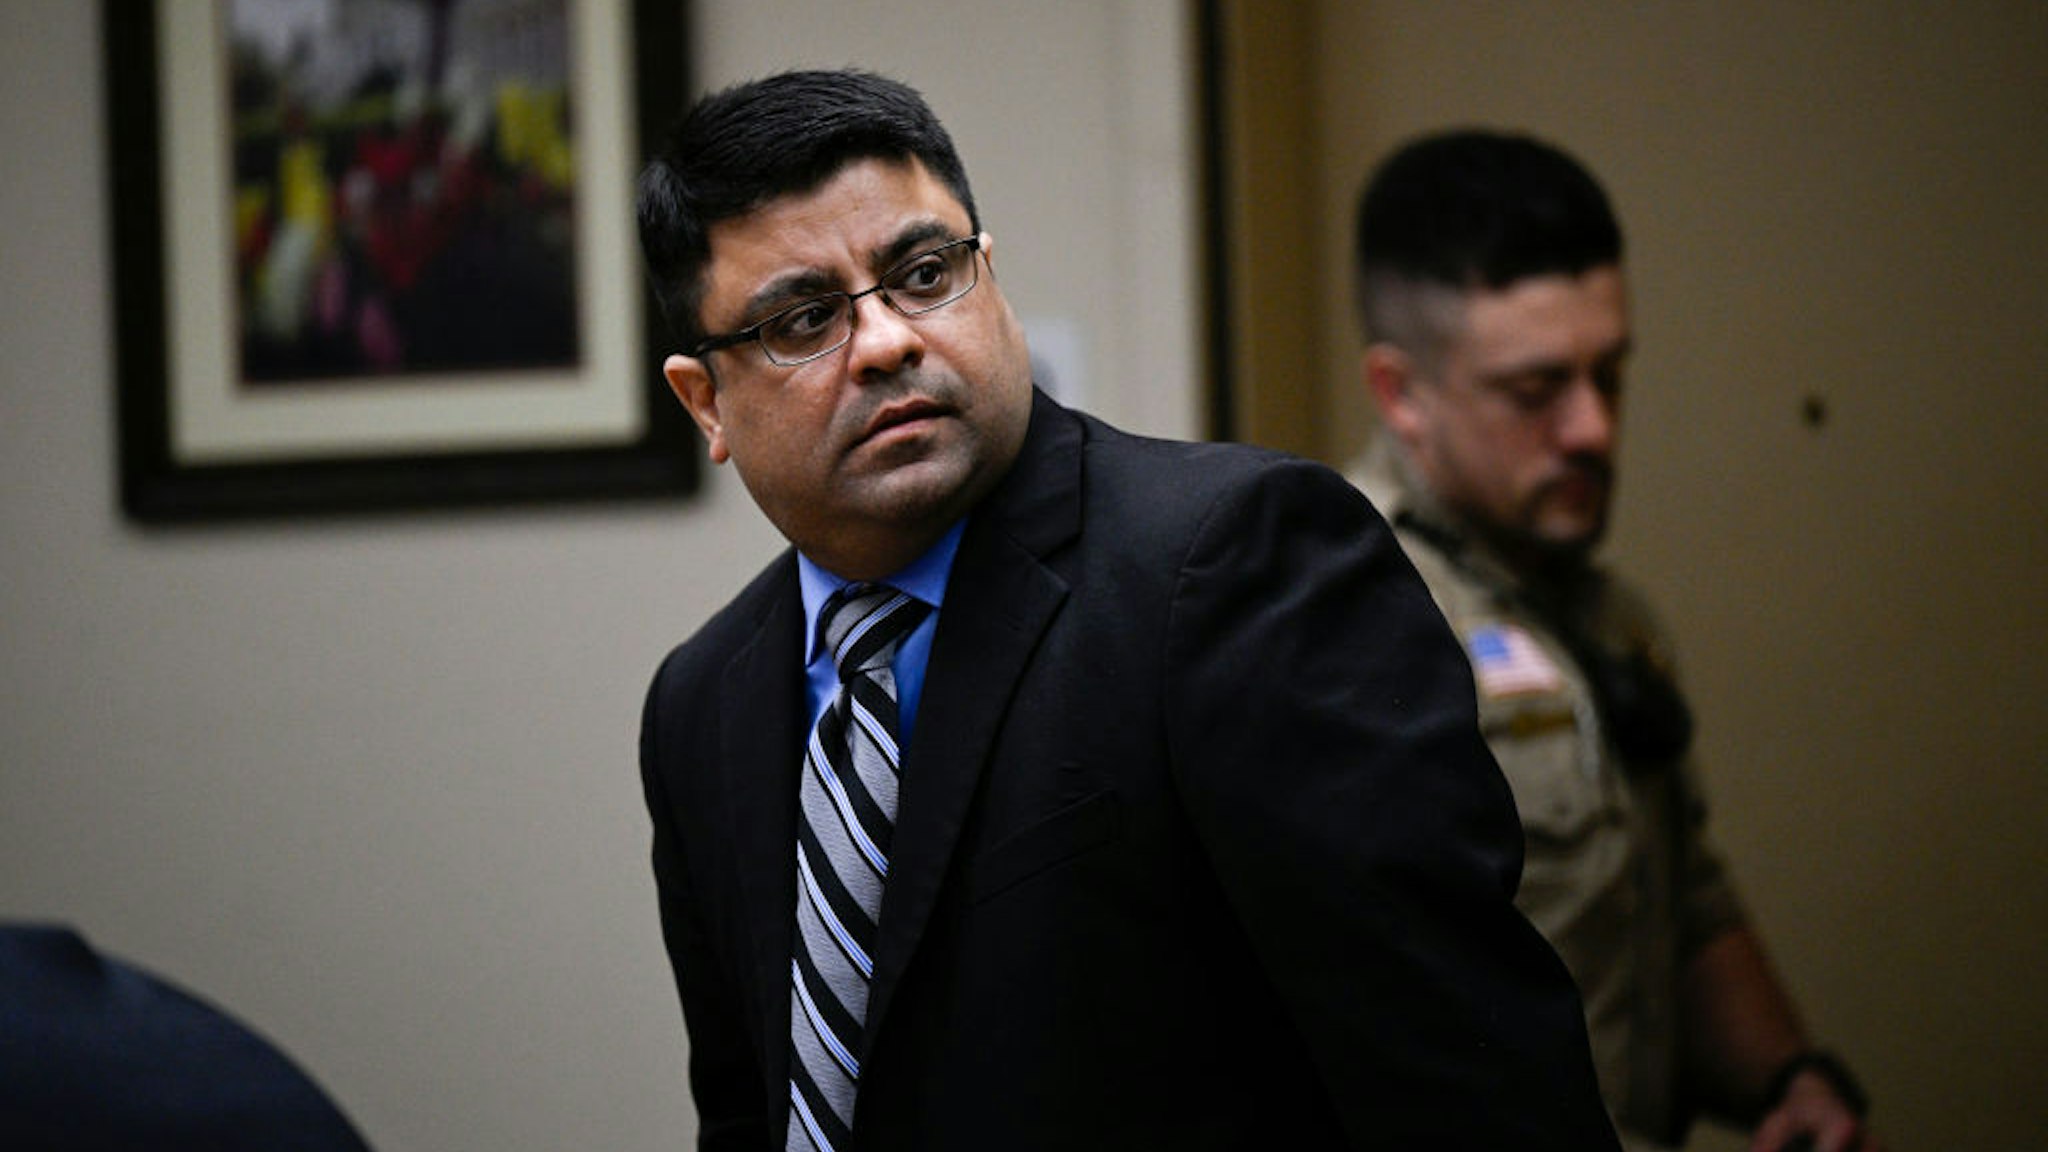 Riverside, CA - April 18: Anurag Chandra, a Temescal Valley resident looks back toward members of the public as his trial begins Tuesday, April 18, 2023, in Riverside. Prosecutors say on Jan. 23, 2020, he allegedly killed three Corona teenagers by running them off the road after they played a doorbell-ringing prank on the man.